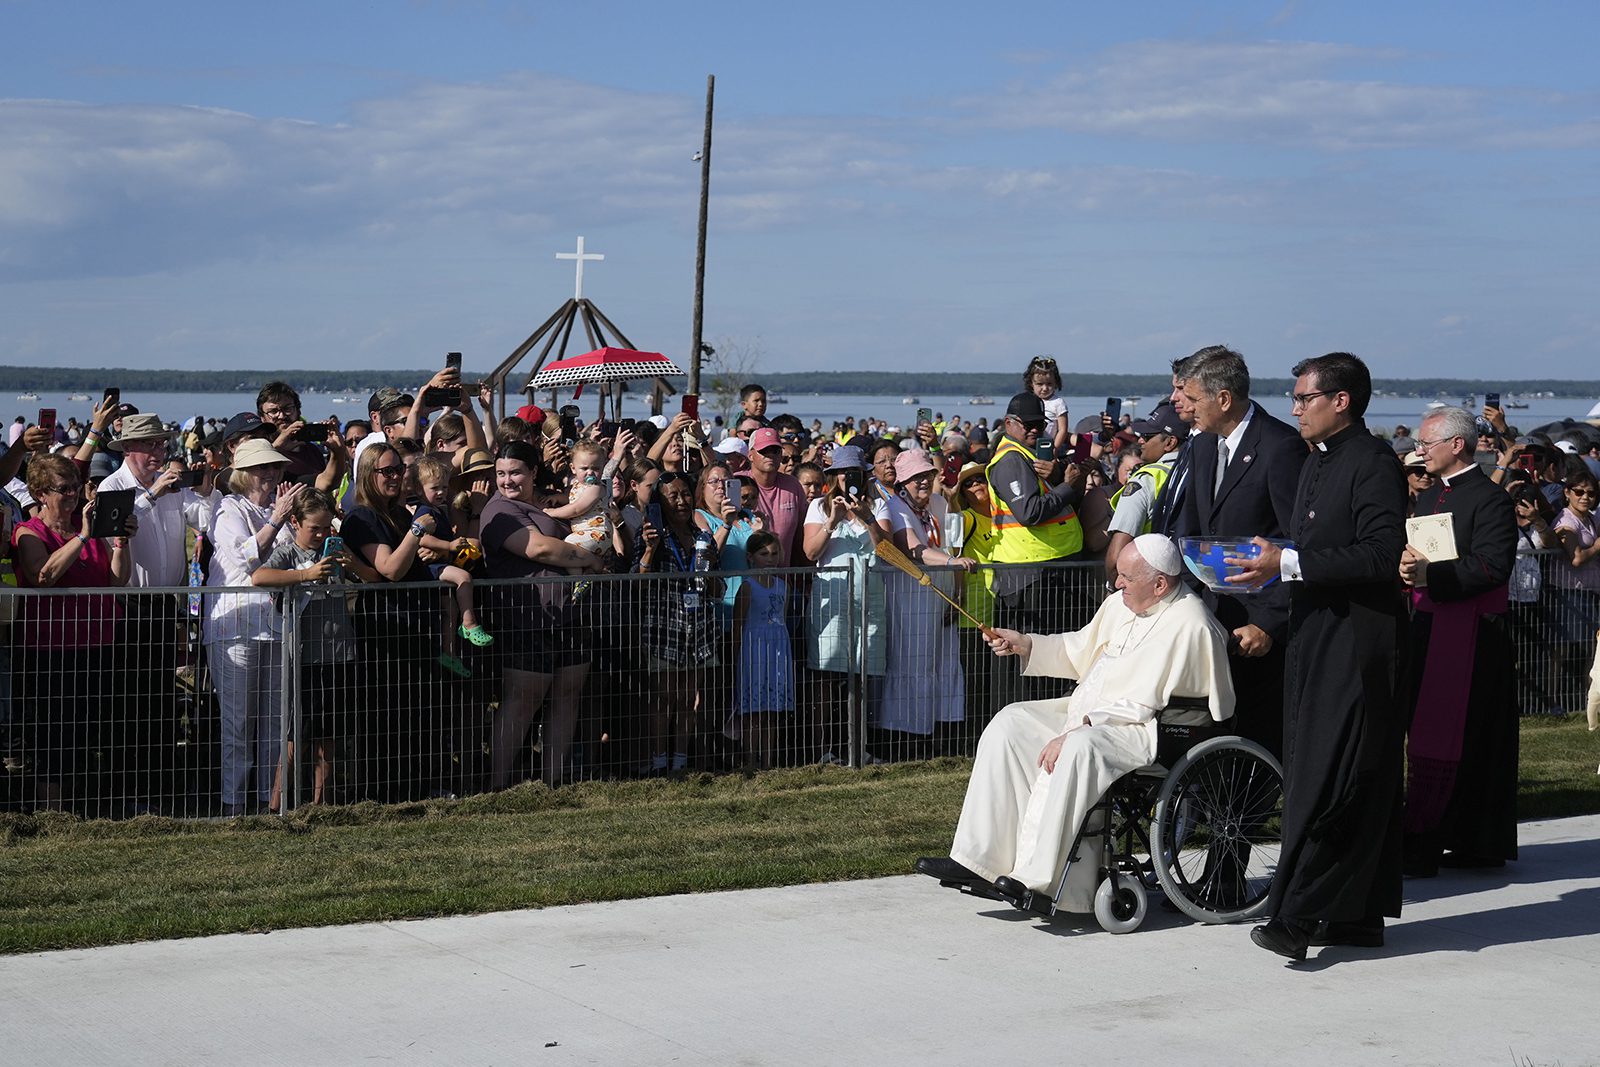 Pope Francis blesses faithfuls as he arrives at the Lac Ste. Anne pilgrimage site in Alberta, Canada, Tuesday, July 26, 2022. Pope Francis is on a second day of a "penitential" six-day visit to Canada to beg forgiveness from survivors of the country's residential schools, where Catholic missionaries contributed to the "cultural genocide" of generations of Indigenous children by trying to stamp out their languages, cultures and traditions. (AP Photo/Gregorio Borgia)